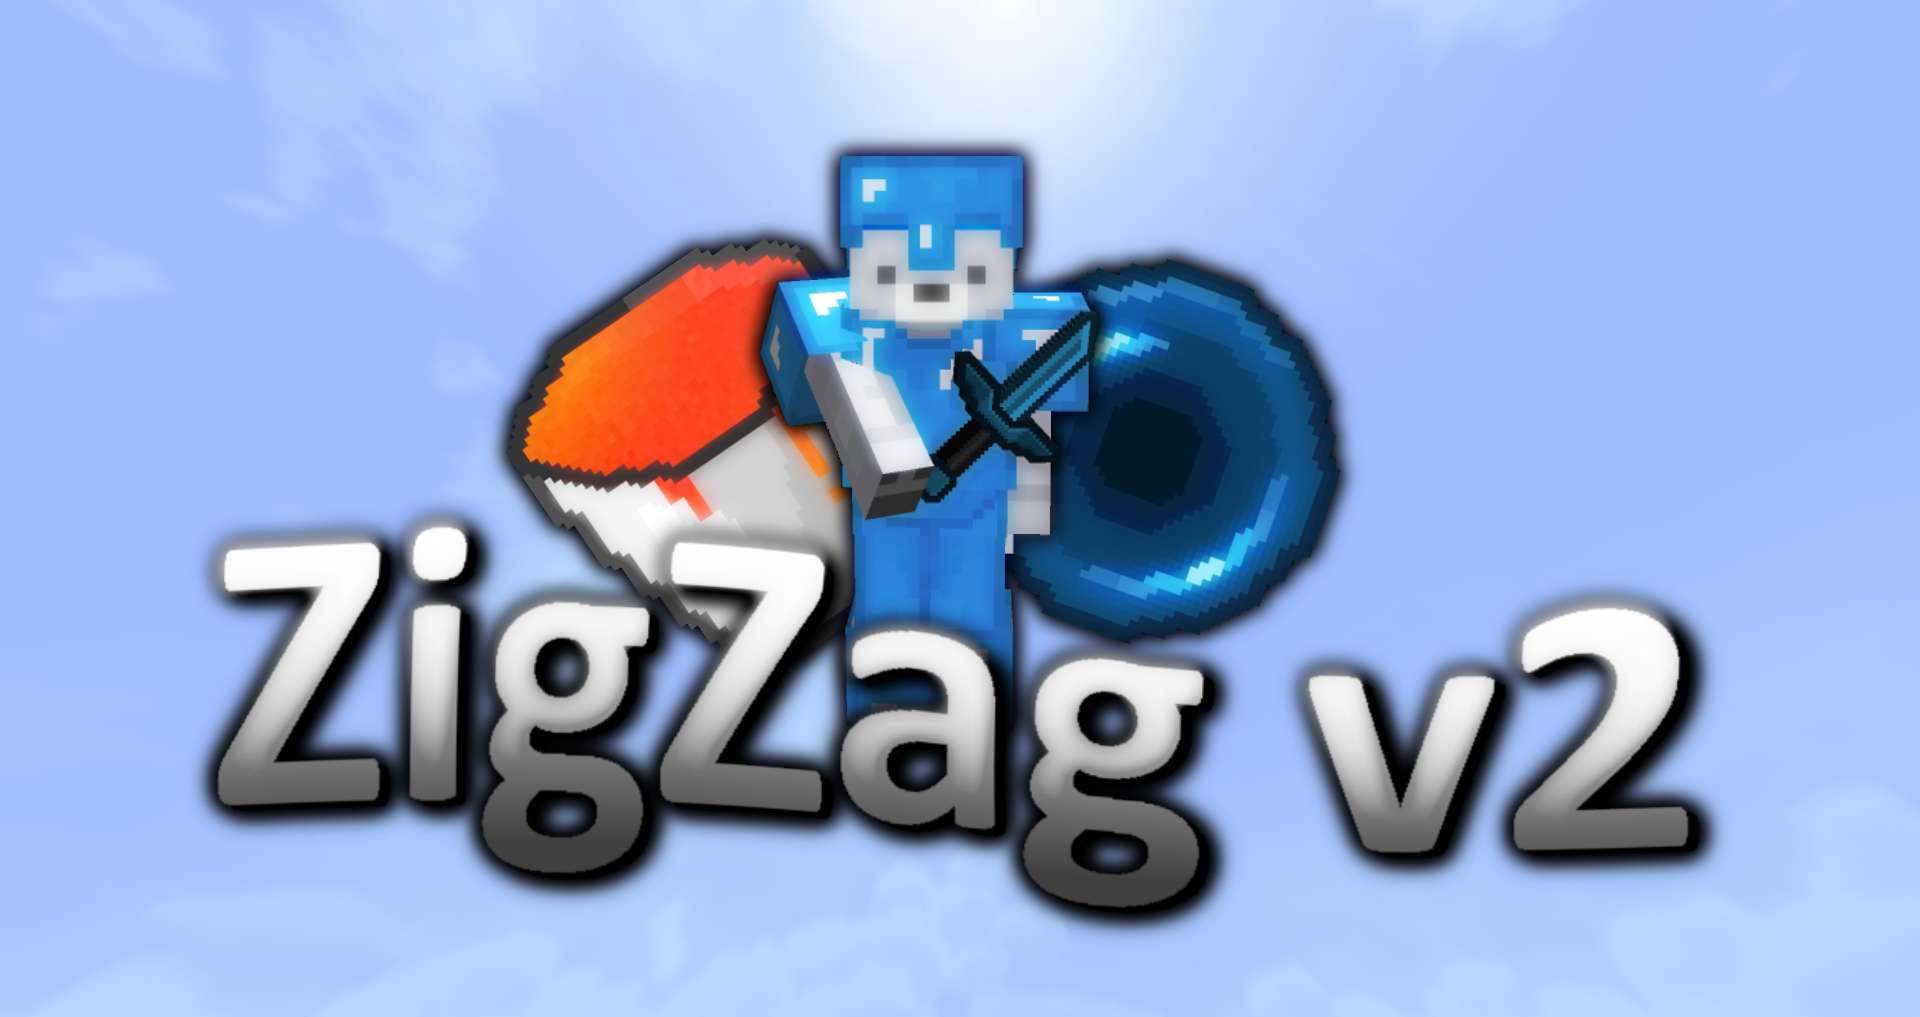 ZigZag v2 64 by 182exe on PvPRP